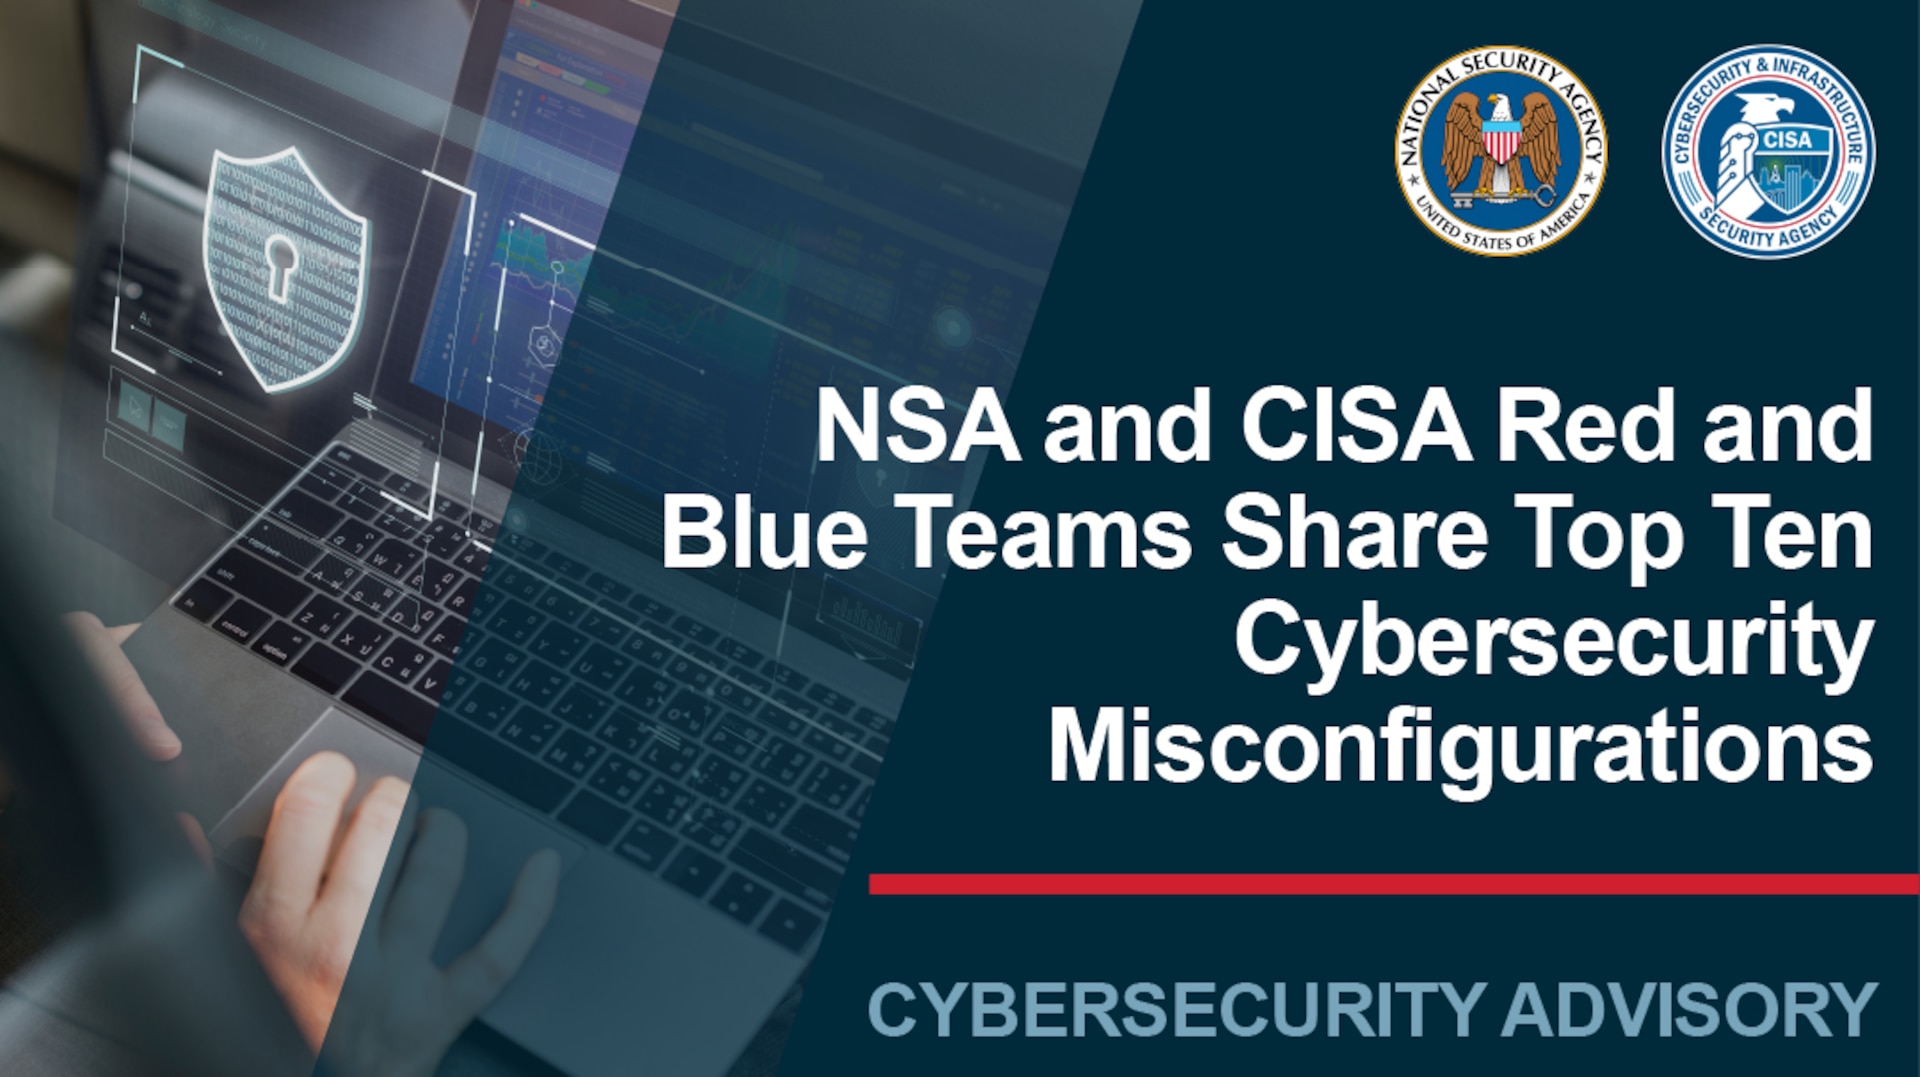 NSA and CISA Red and Blue Teams Share Top Ten
Cybersecurity Misconfigurations. Cybersecurity Advisory.